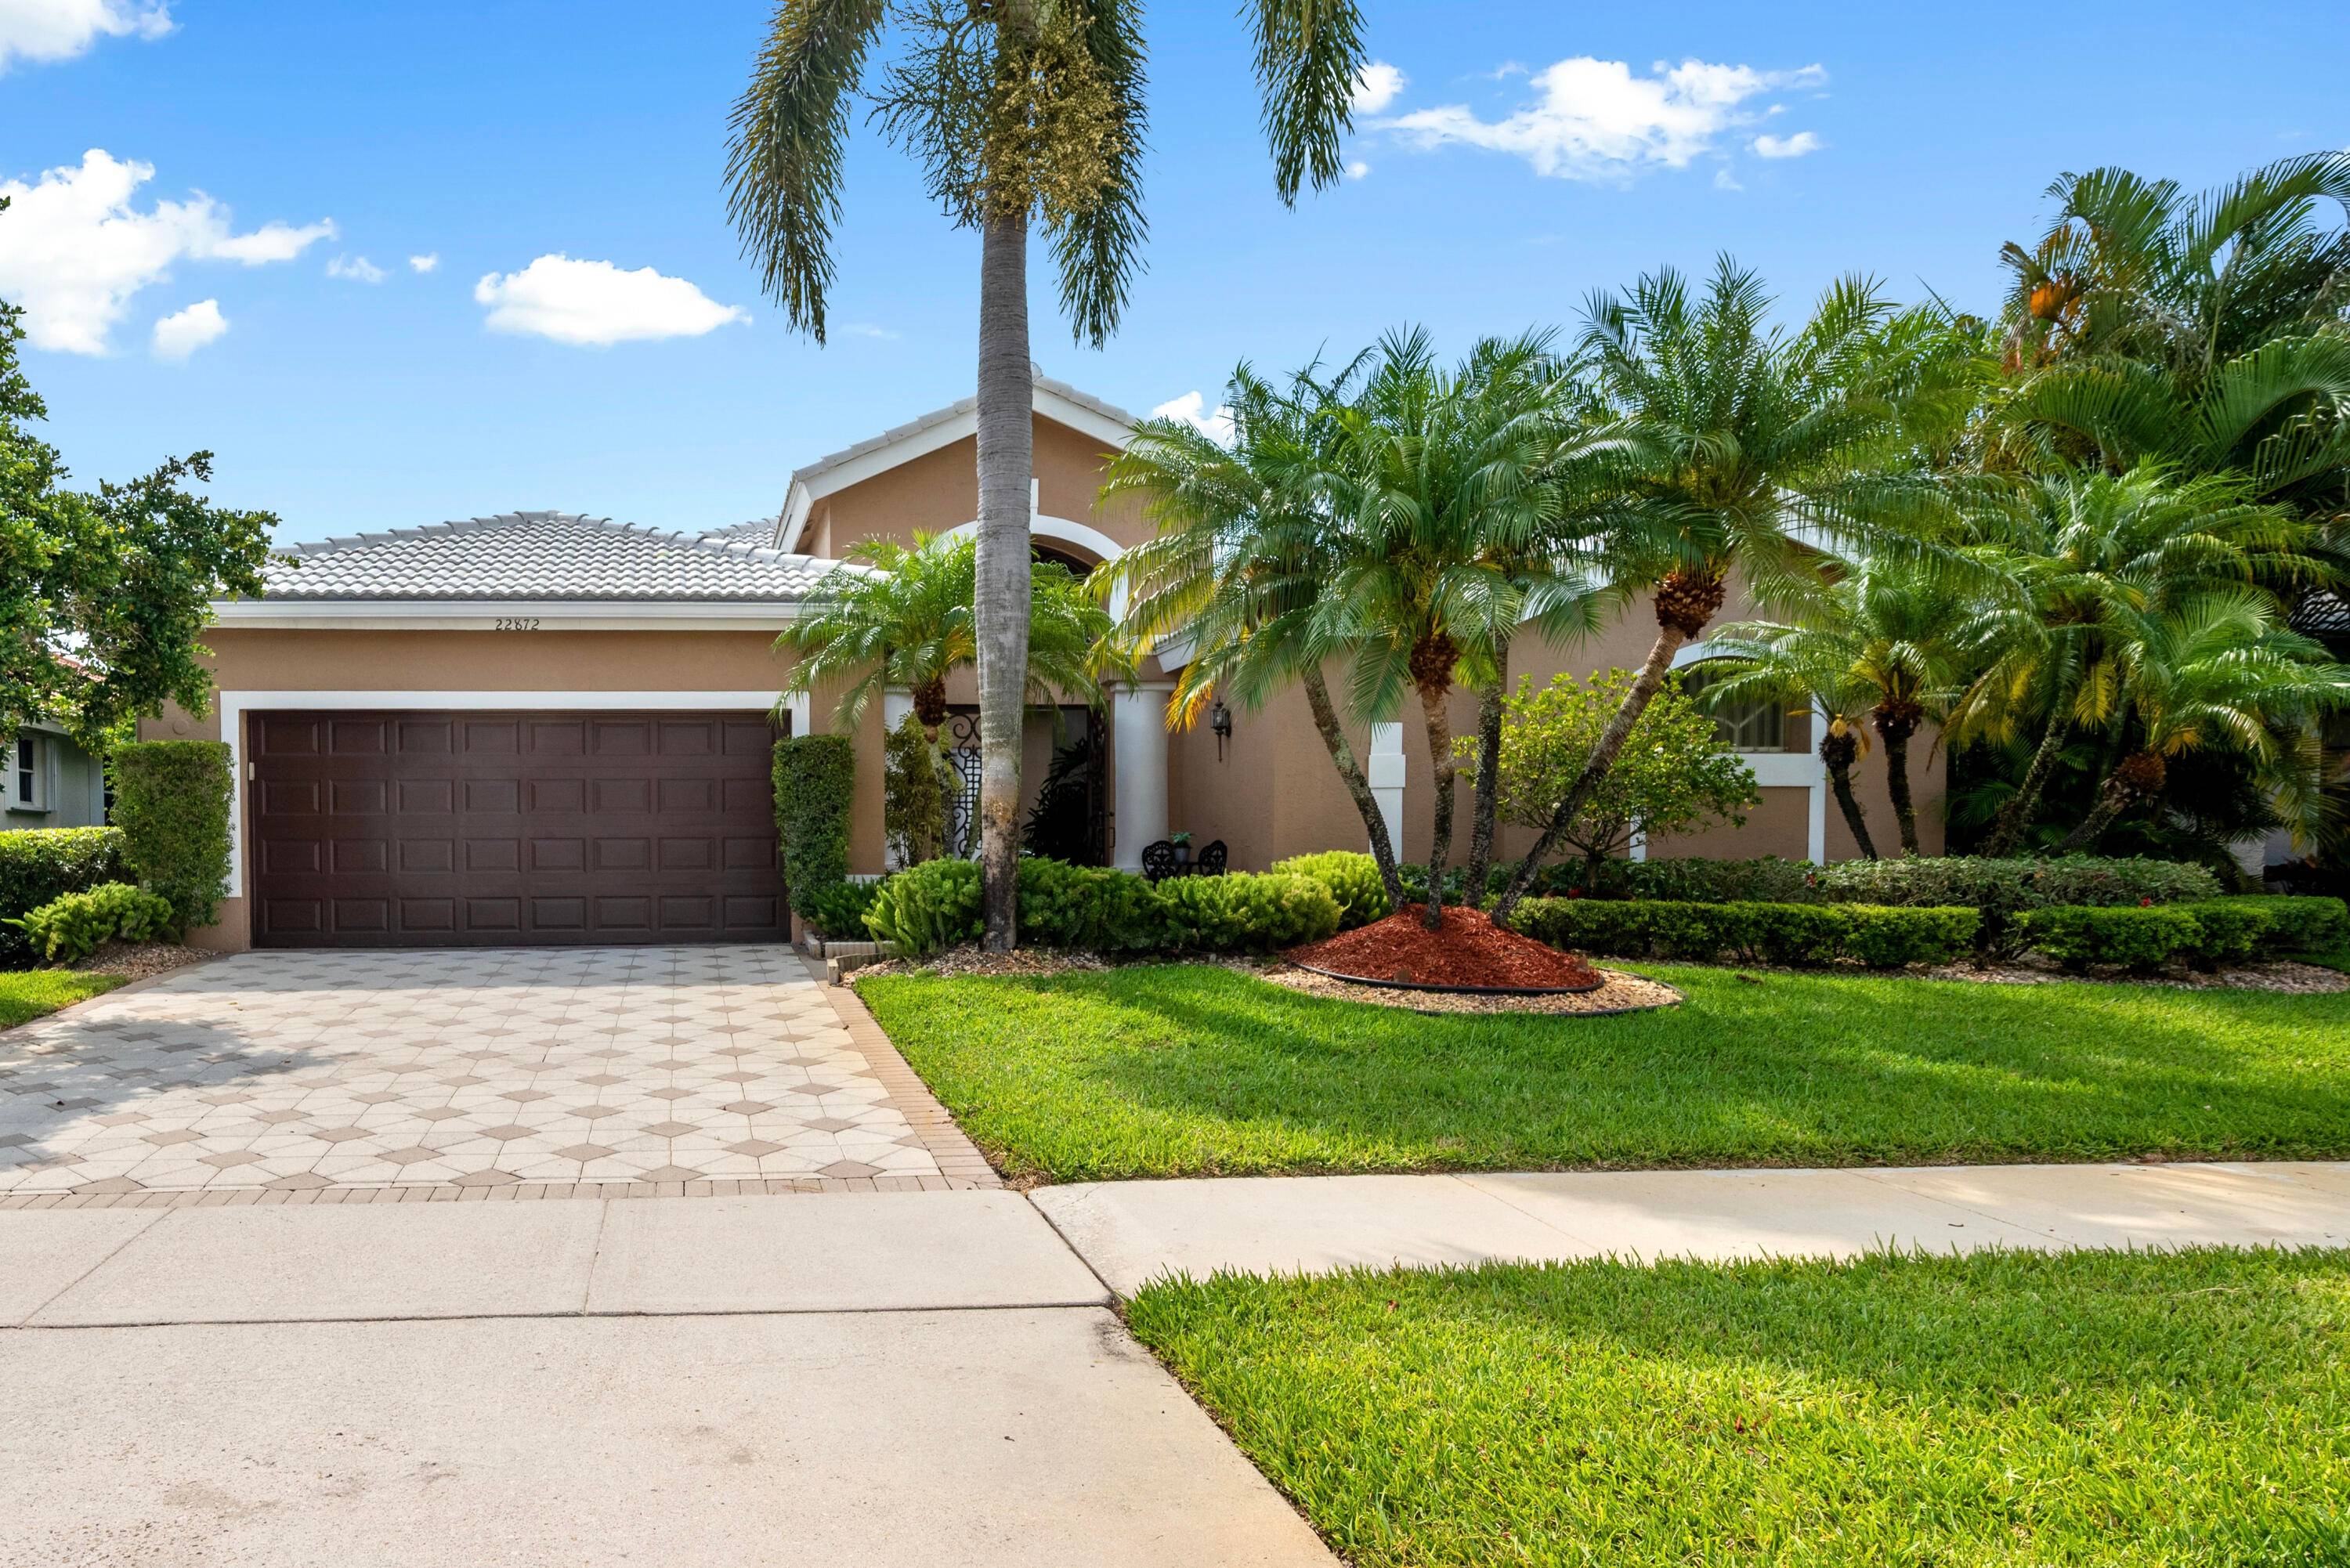 Welcome home to your 3 bedroom, 3 bathroom courtyard pool home located in the fabulous community of La Corniche at Boca Pointe.